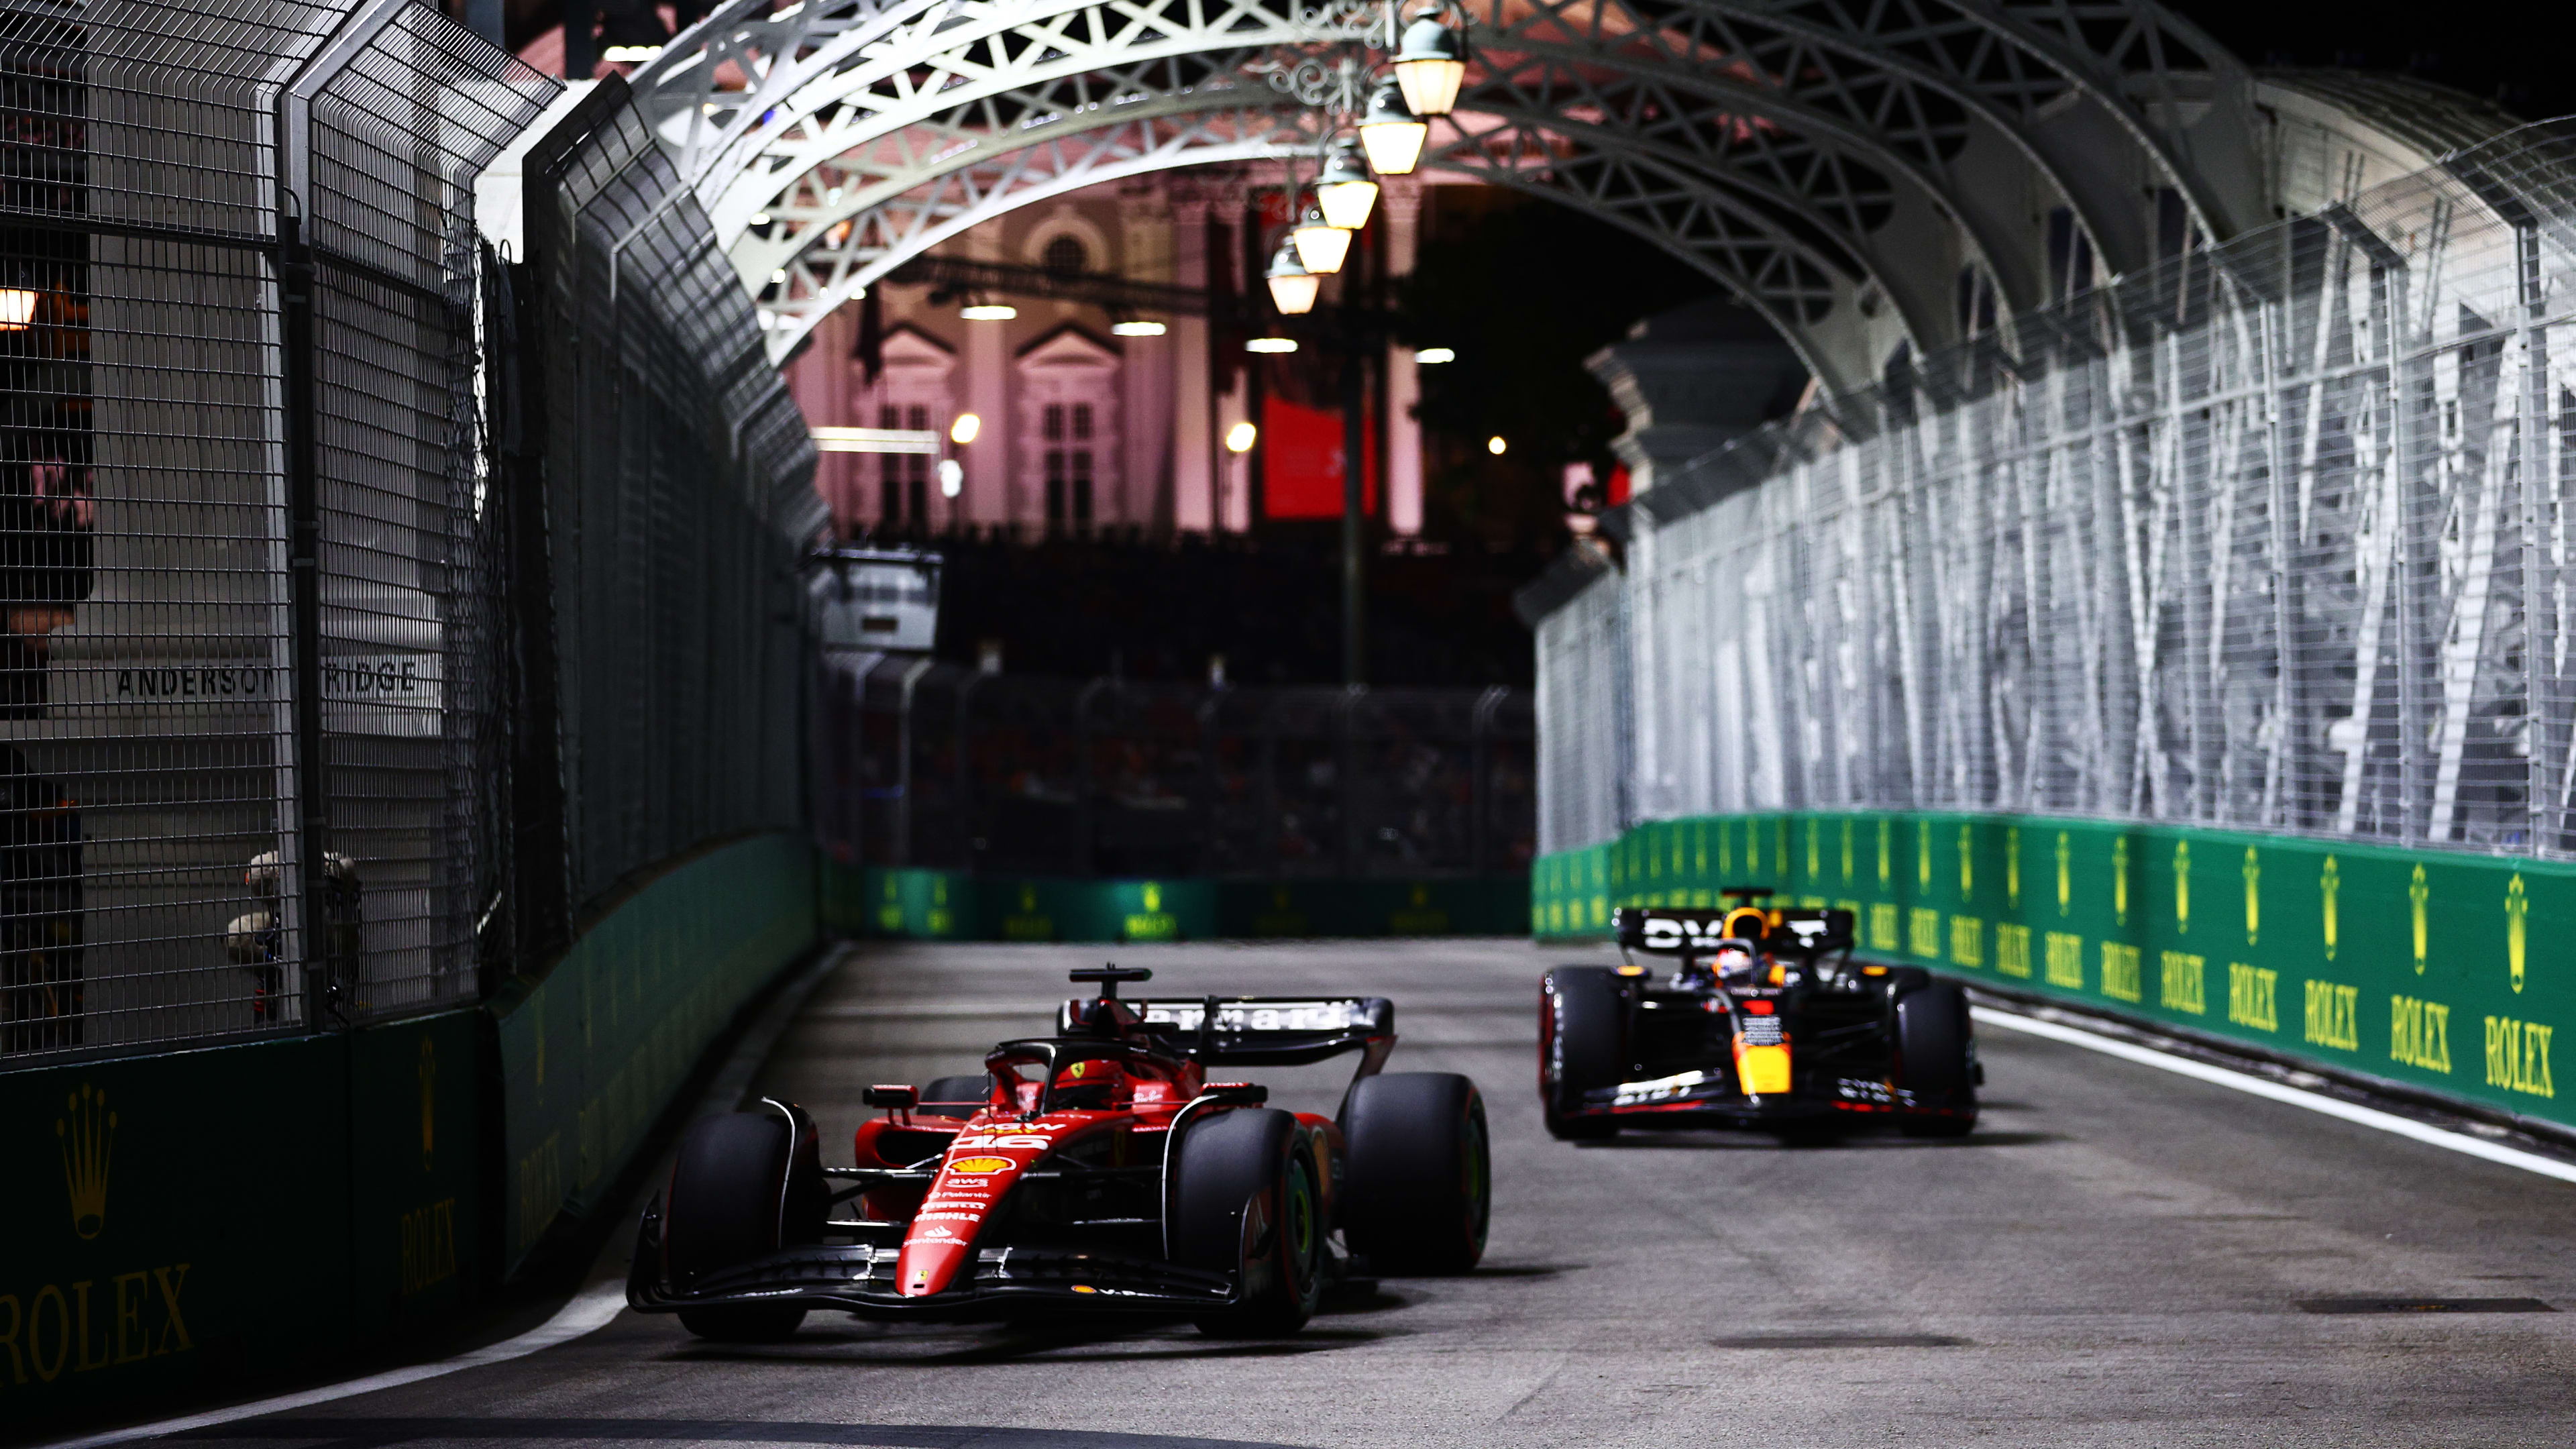 LIVE COVERAGE - Second Practice in Singapore | Formula 1®